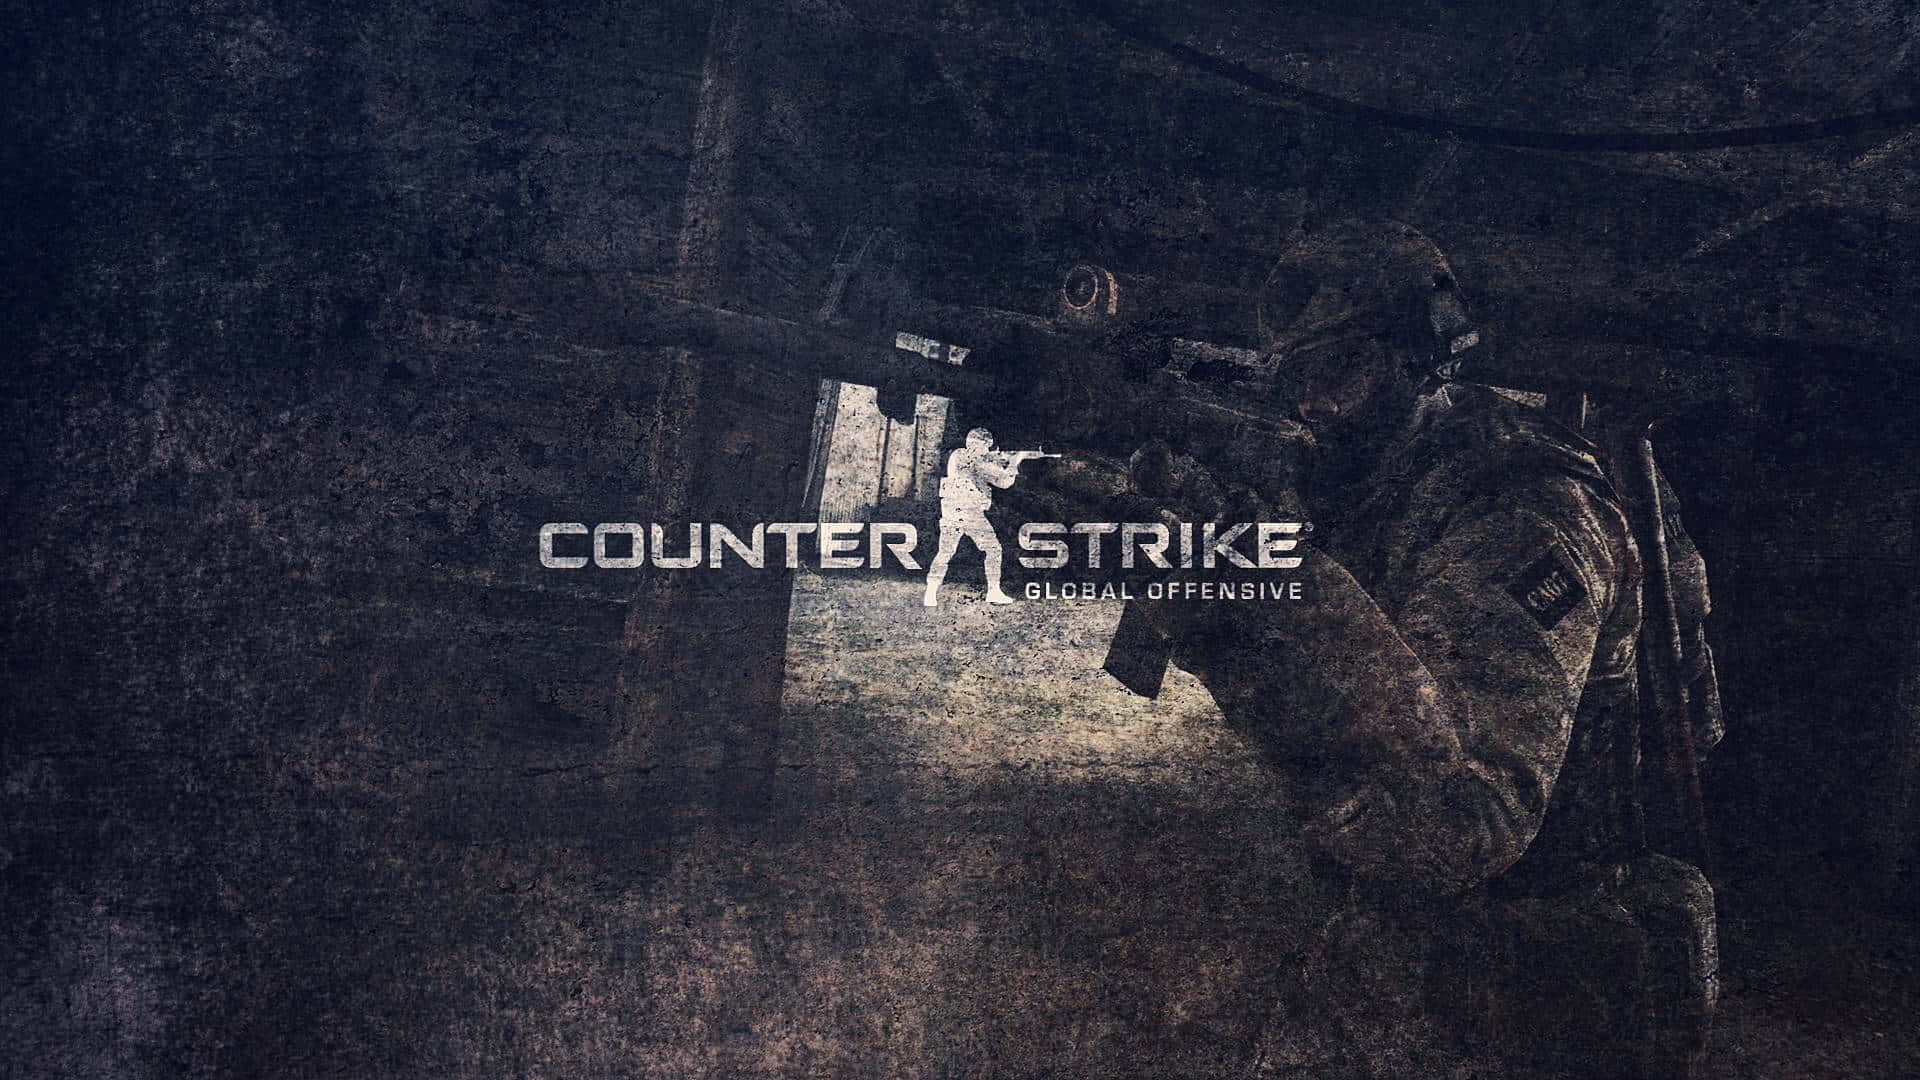 Hd Counter-strike Global Offensive Background 1920 X 1080 Background